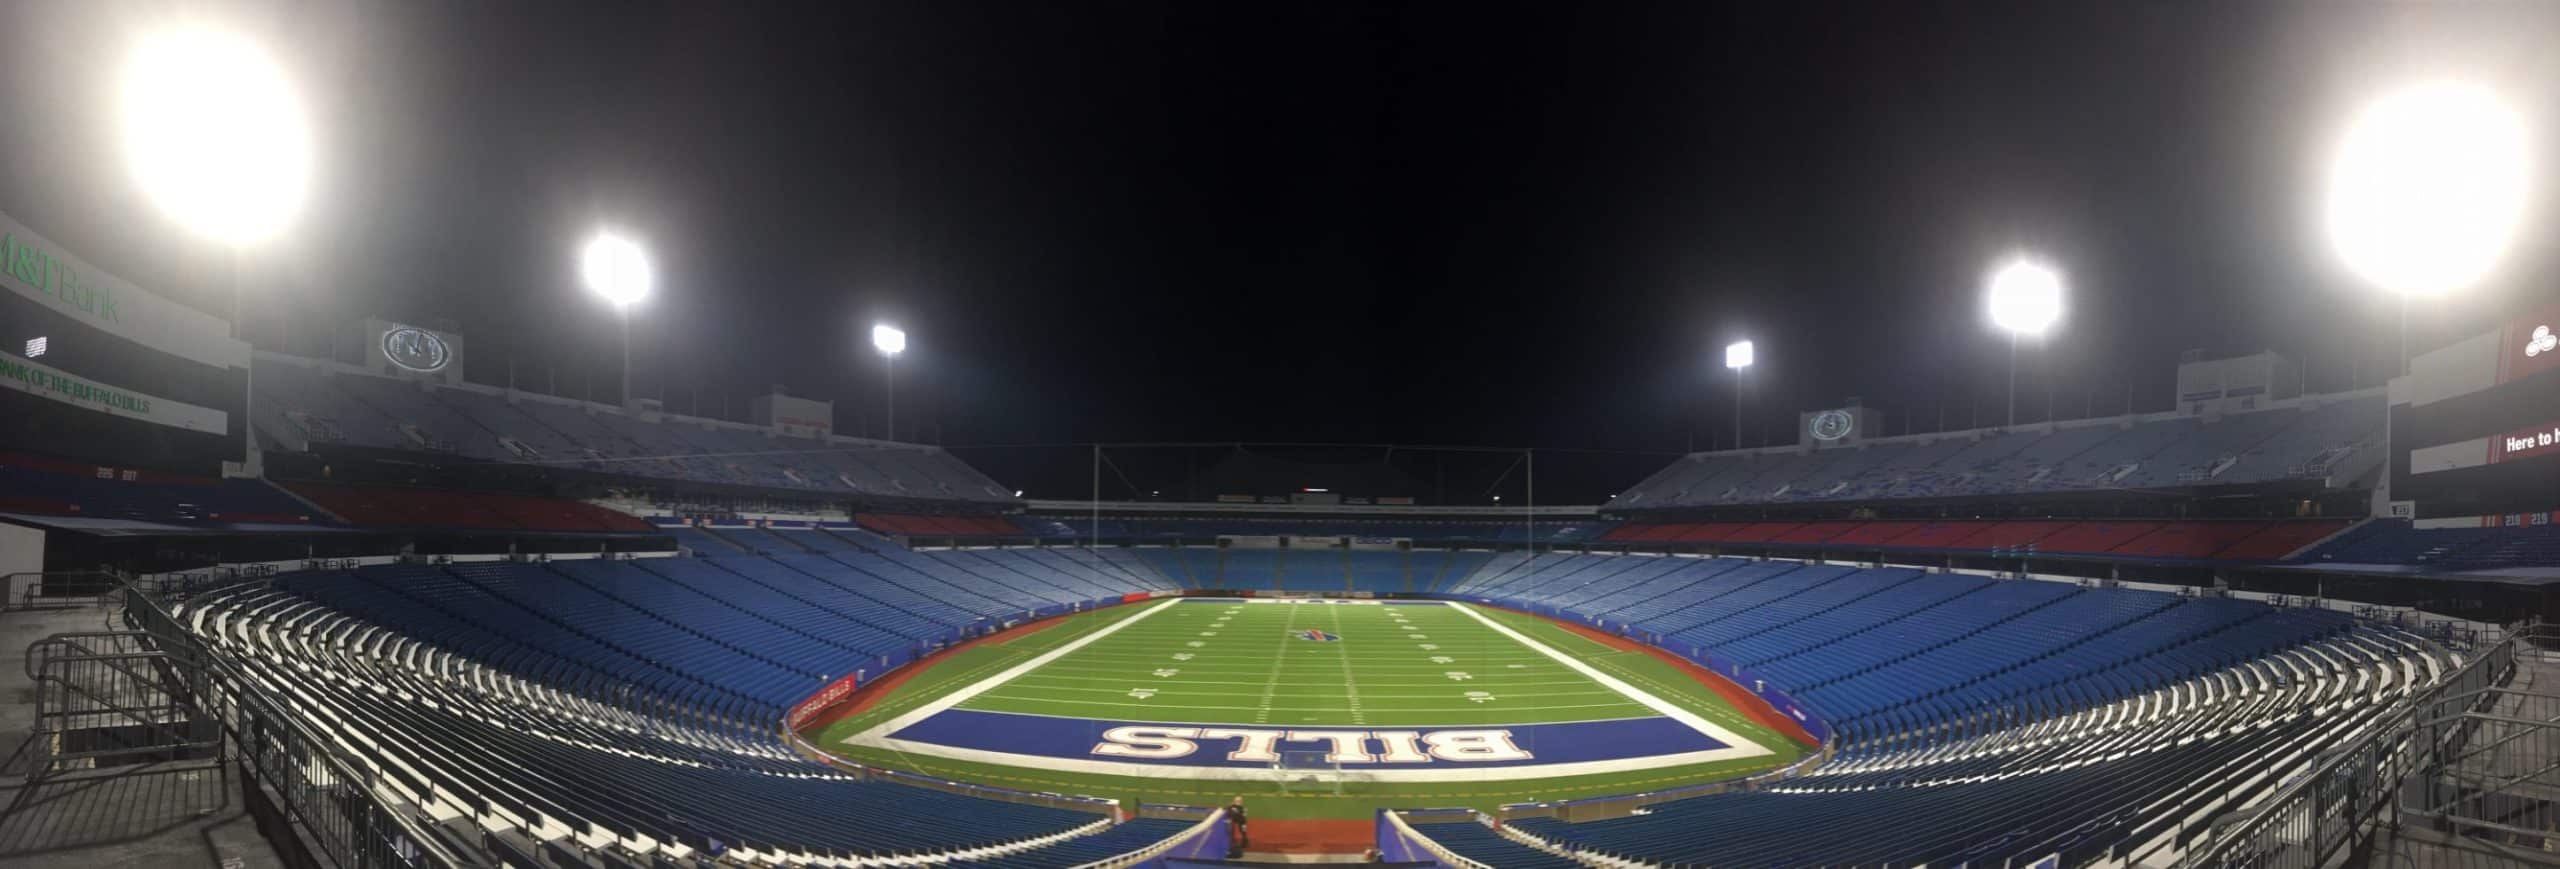 Bills guaranteed to be brighter on the New Era field this year. Here’s why…